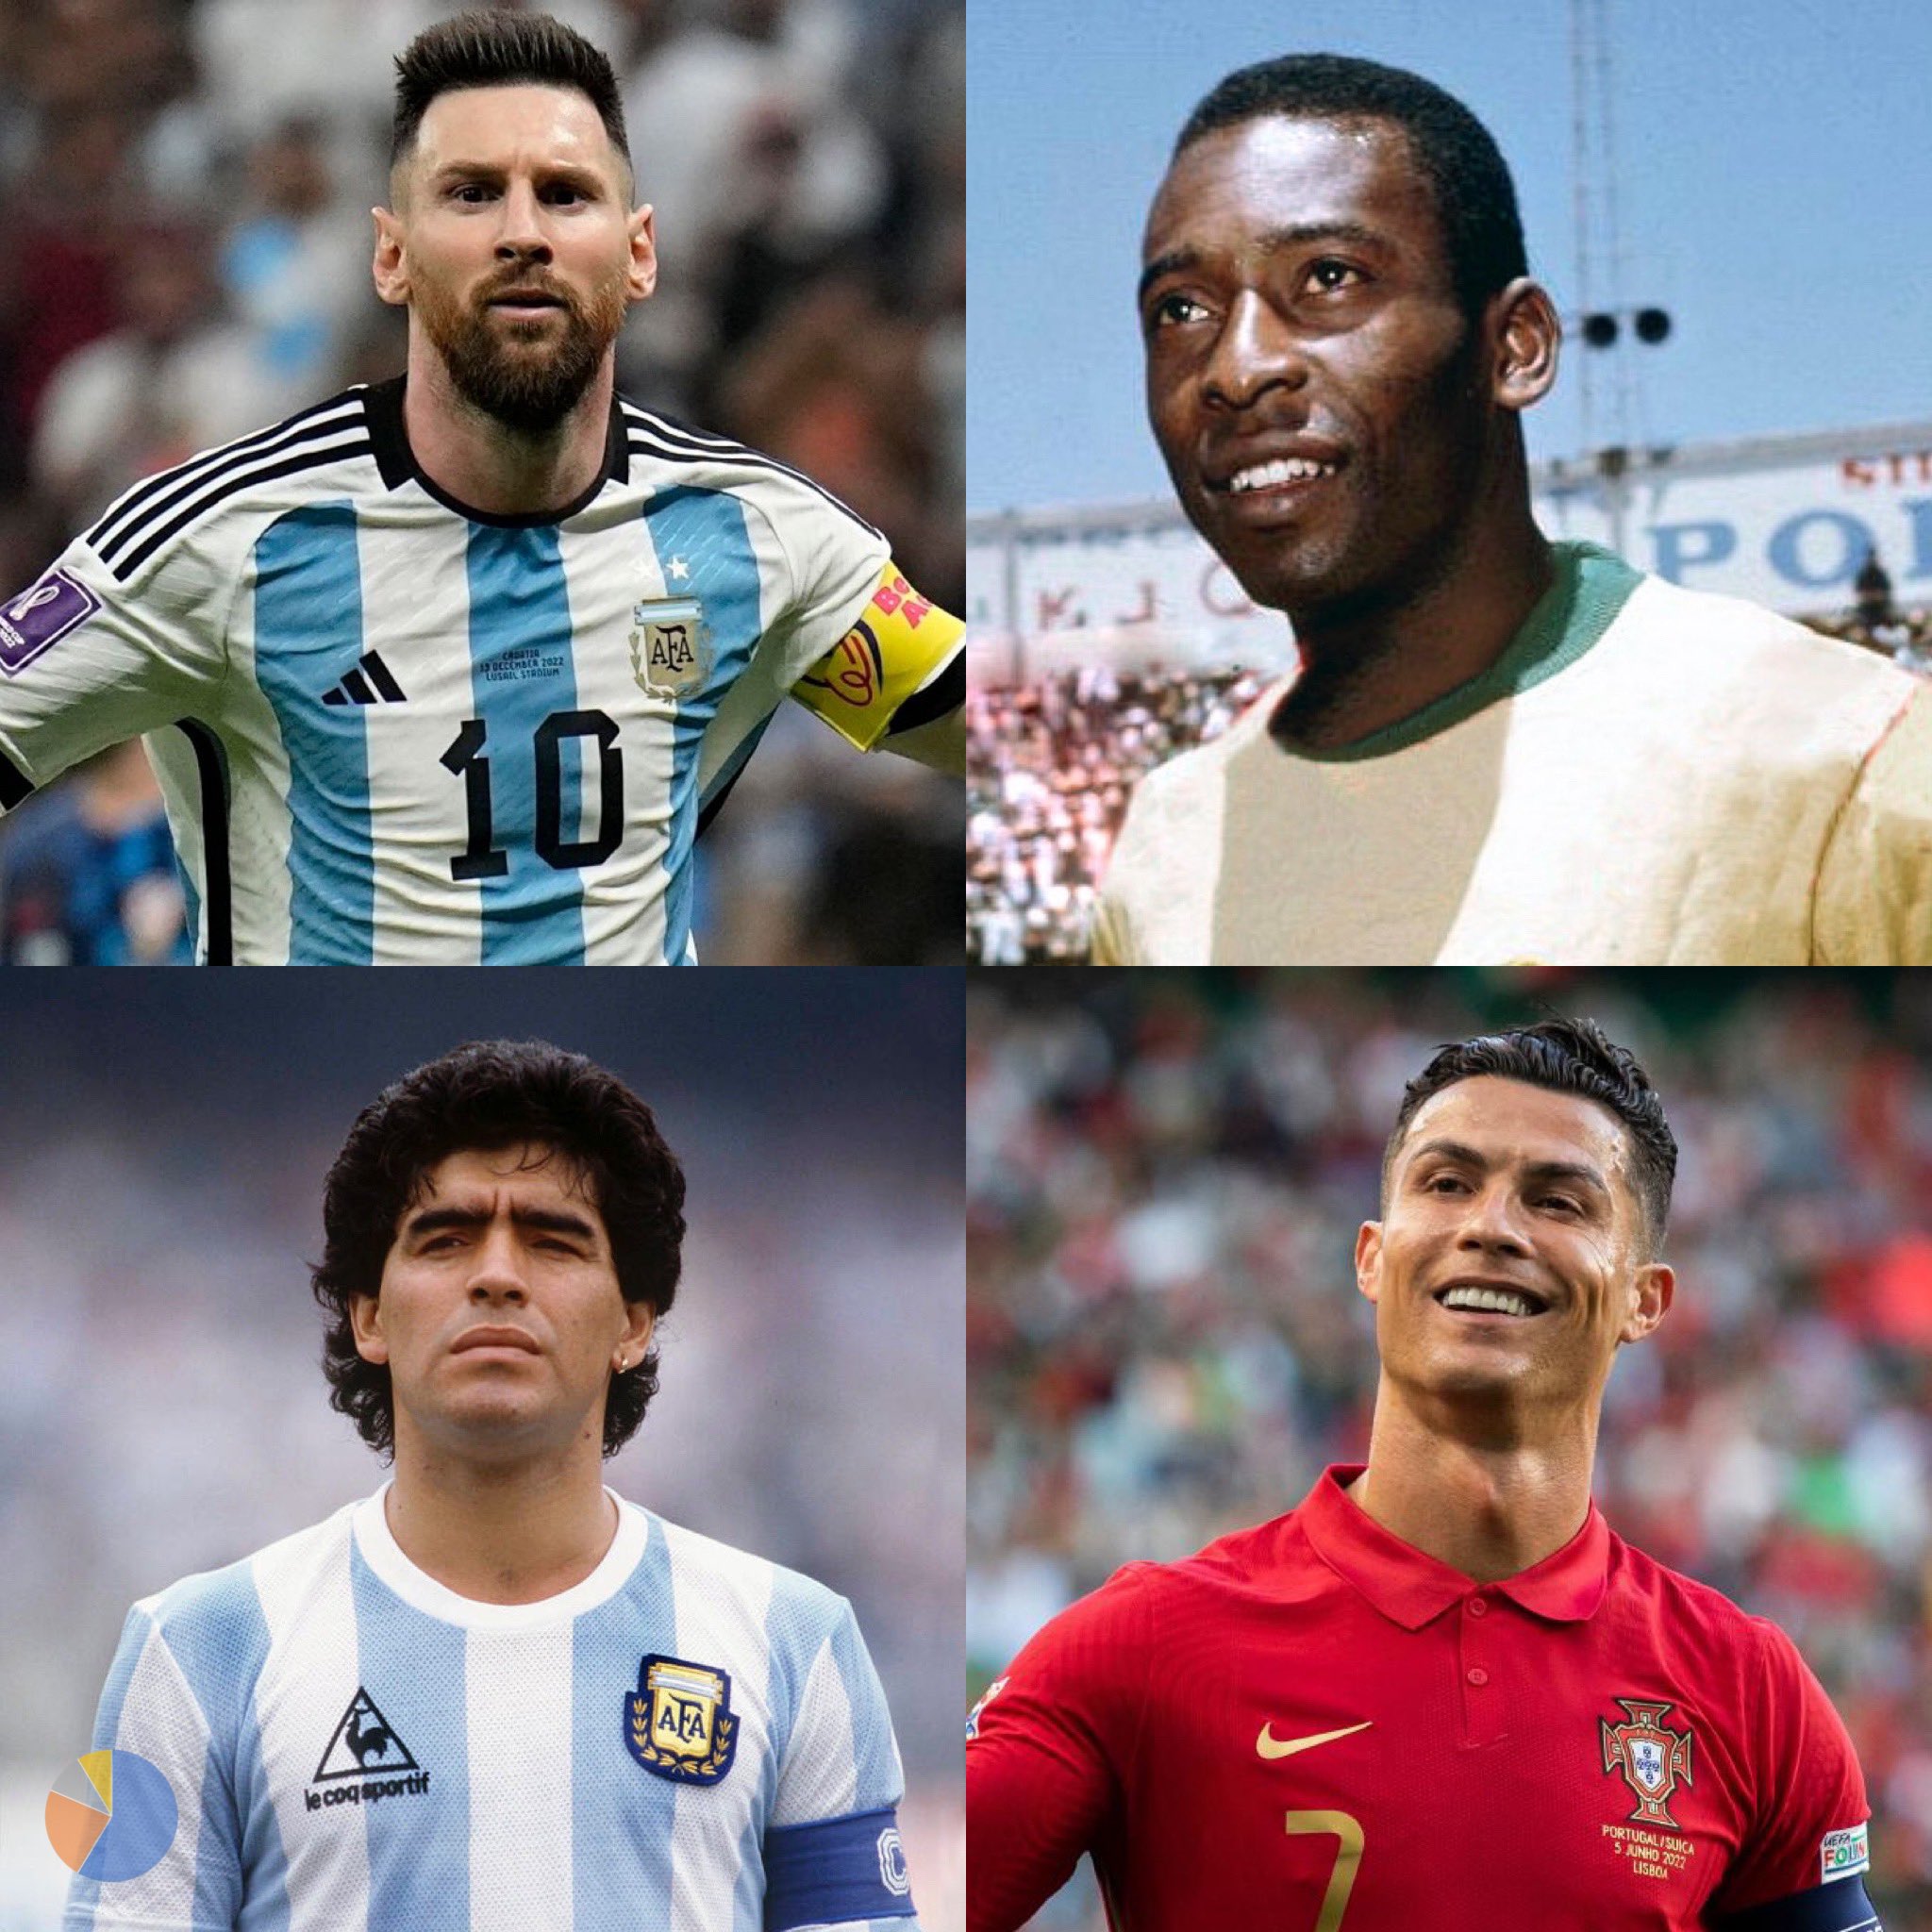 TOP 5 Best Football Players Of All Time 